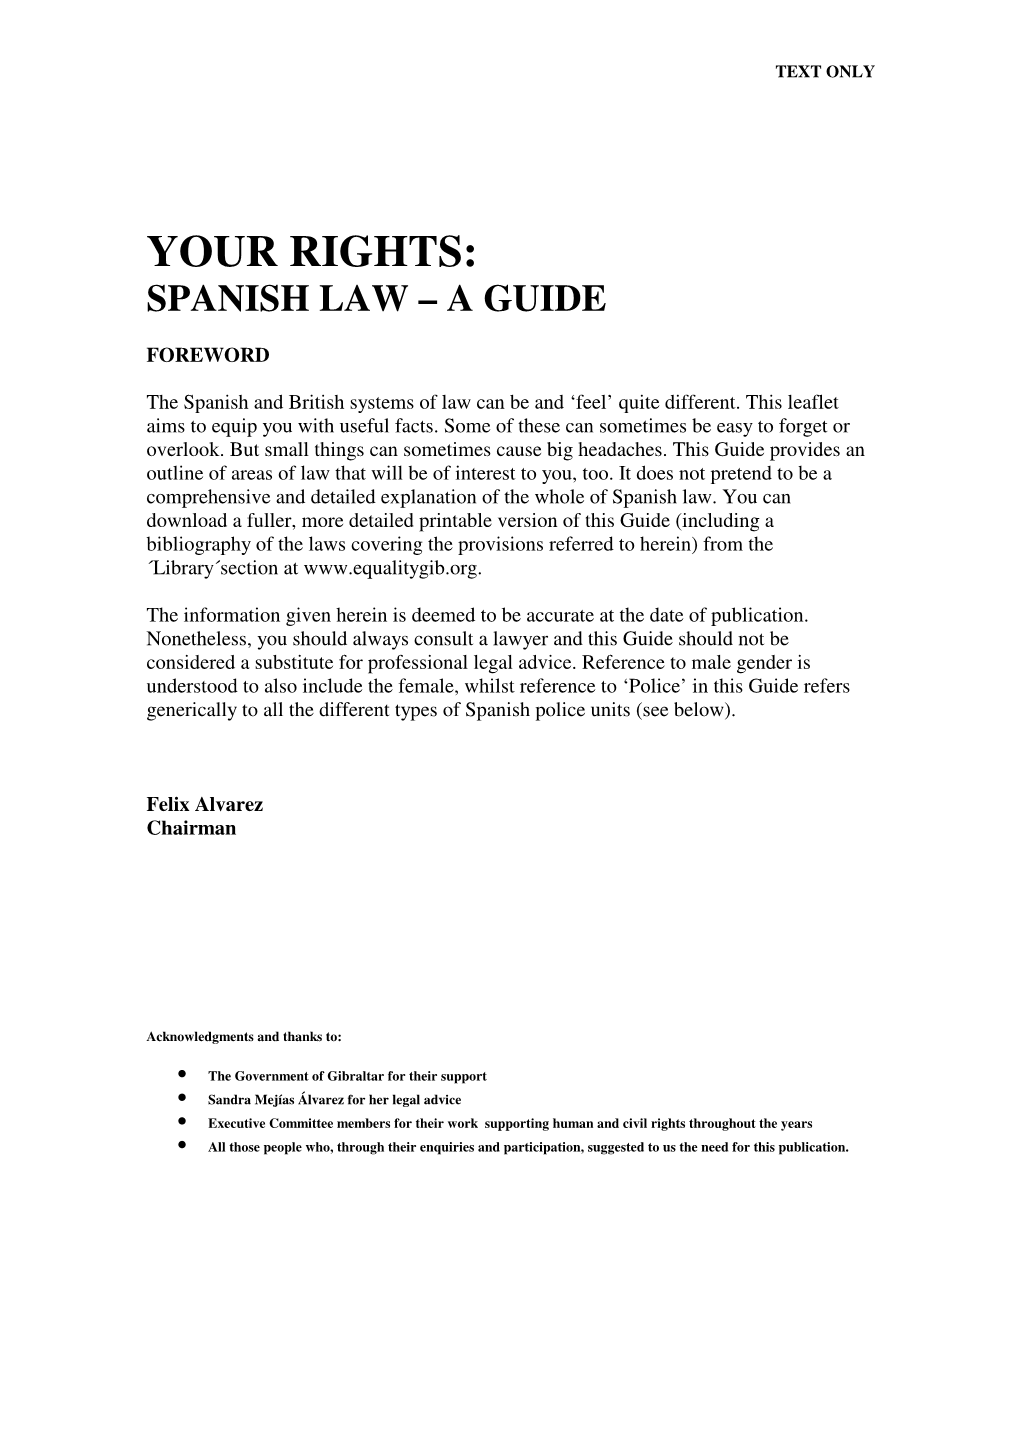 Your Rights: Spanish Law – a Guide